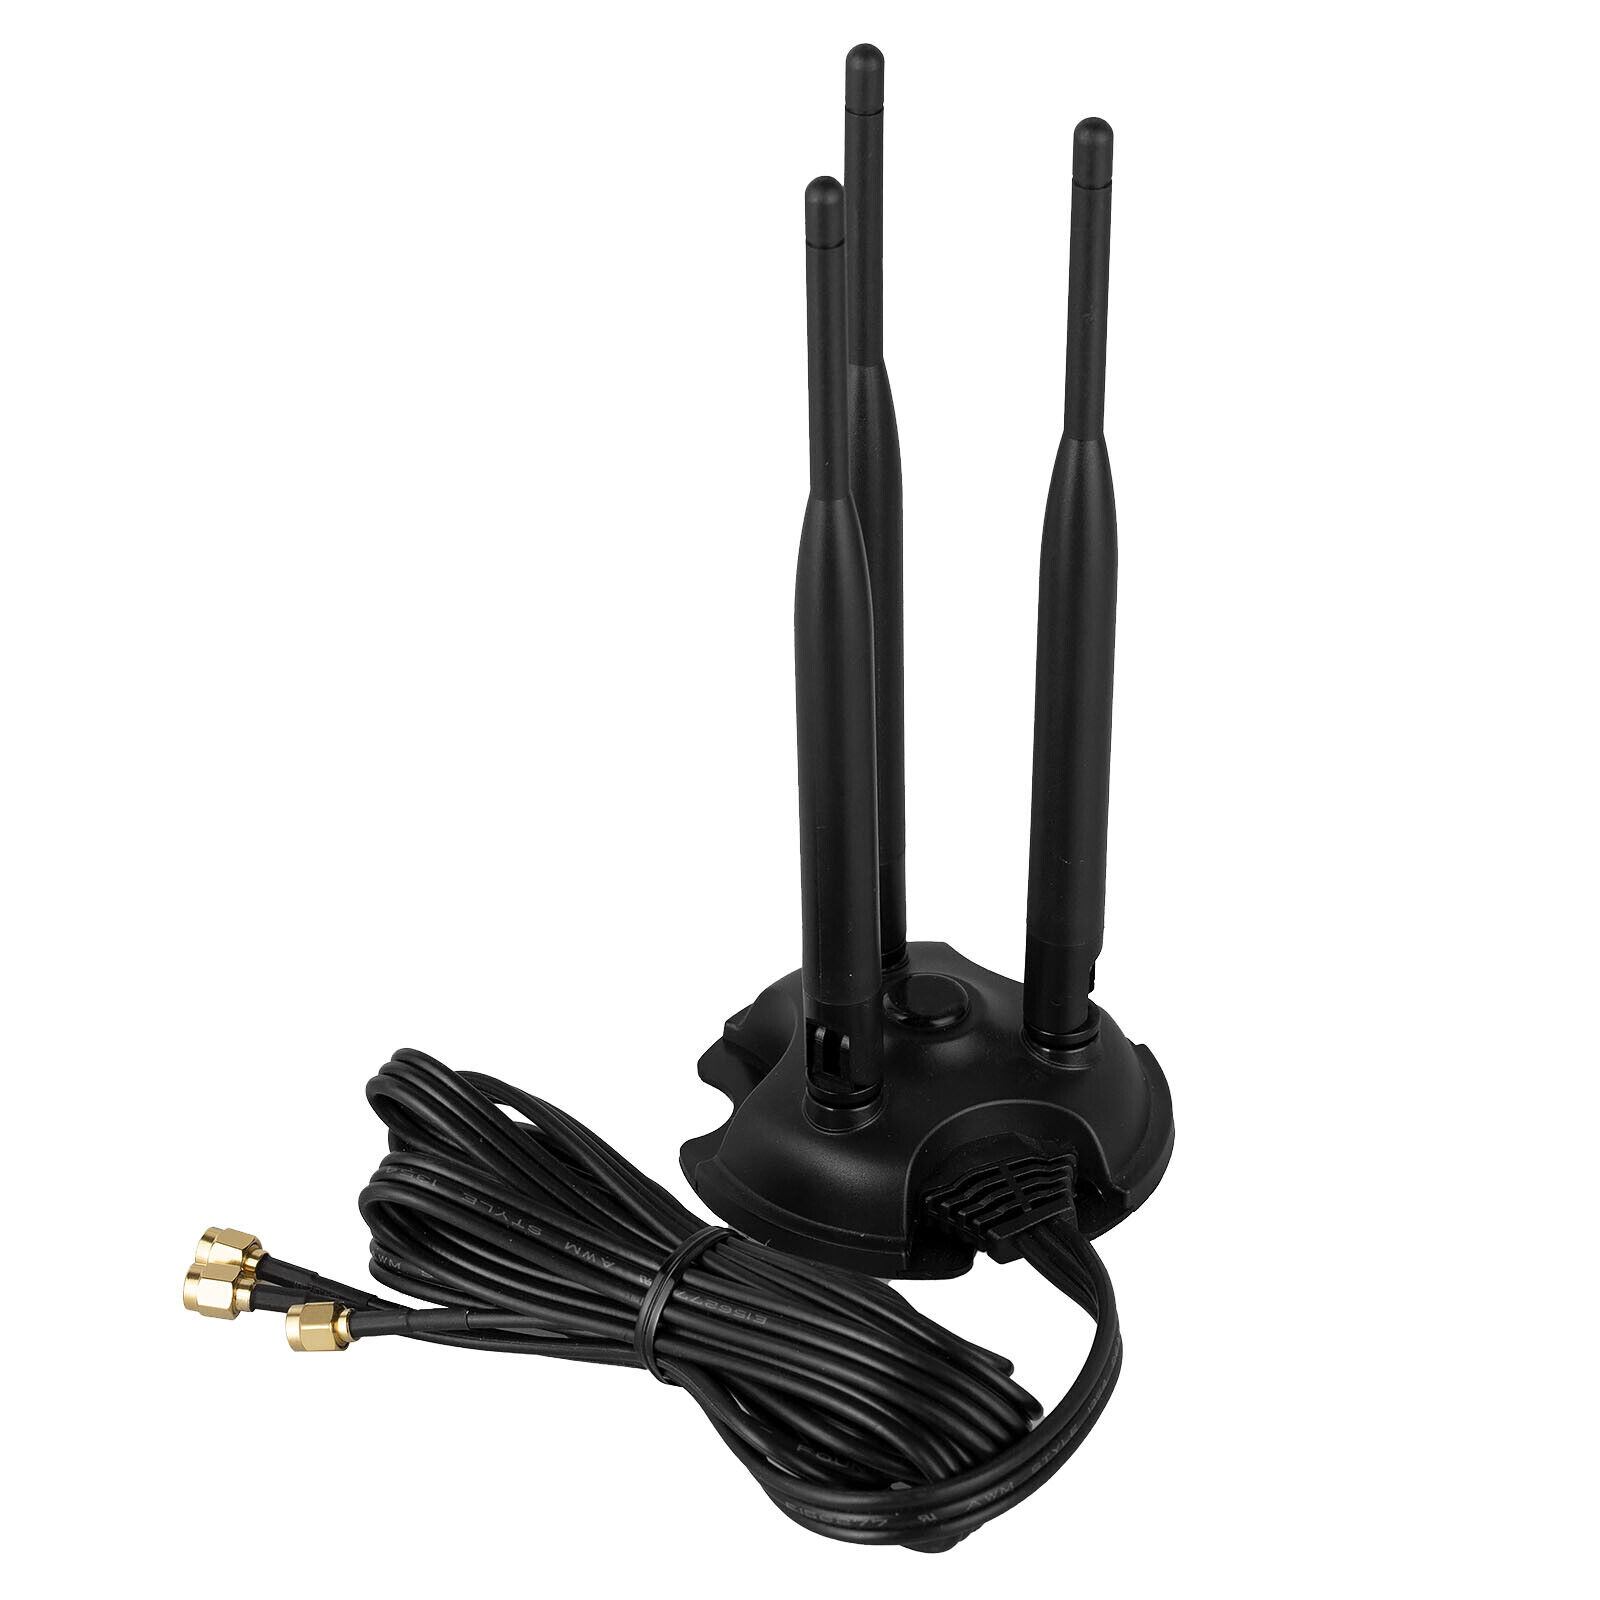 6dBi 3 Wireless Antenna 6.5ft RP-SMA Cable Magnetic Stand WiFi Signal Extender